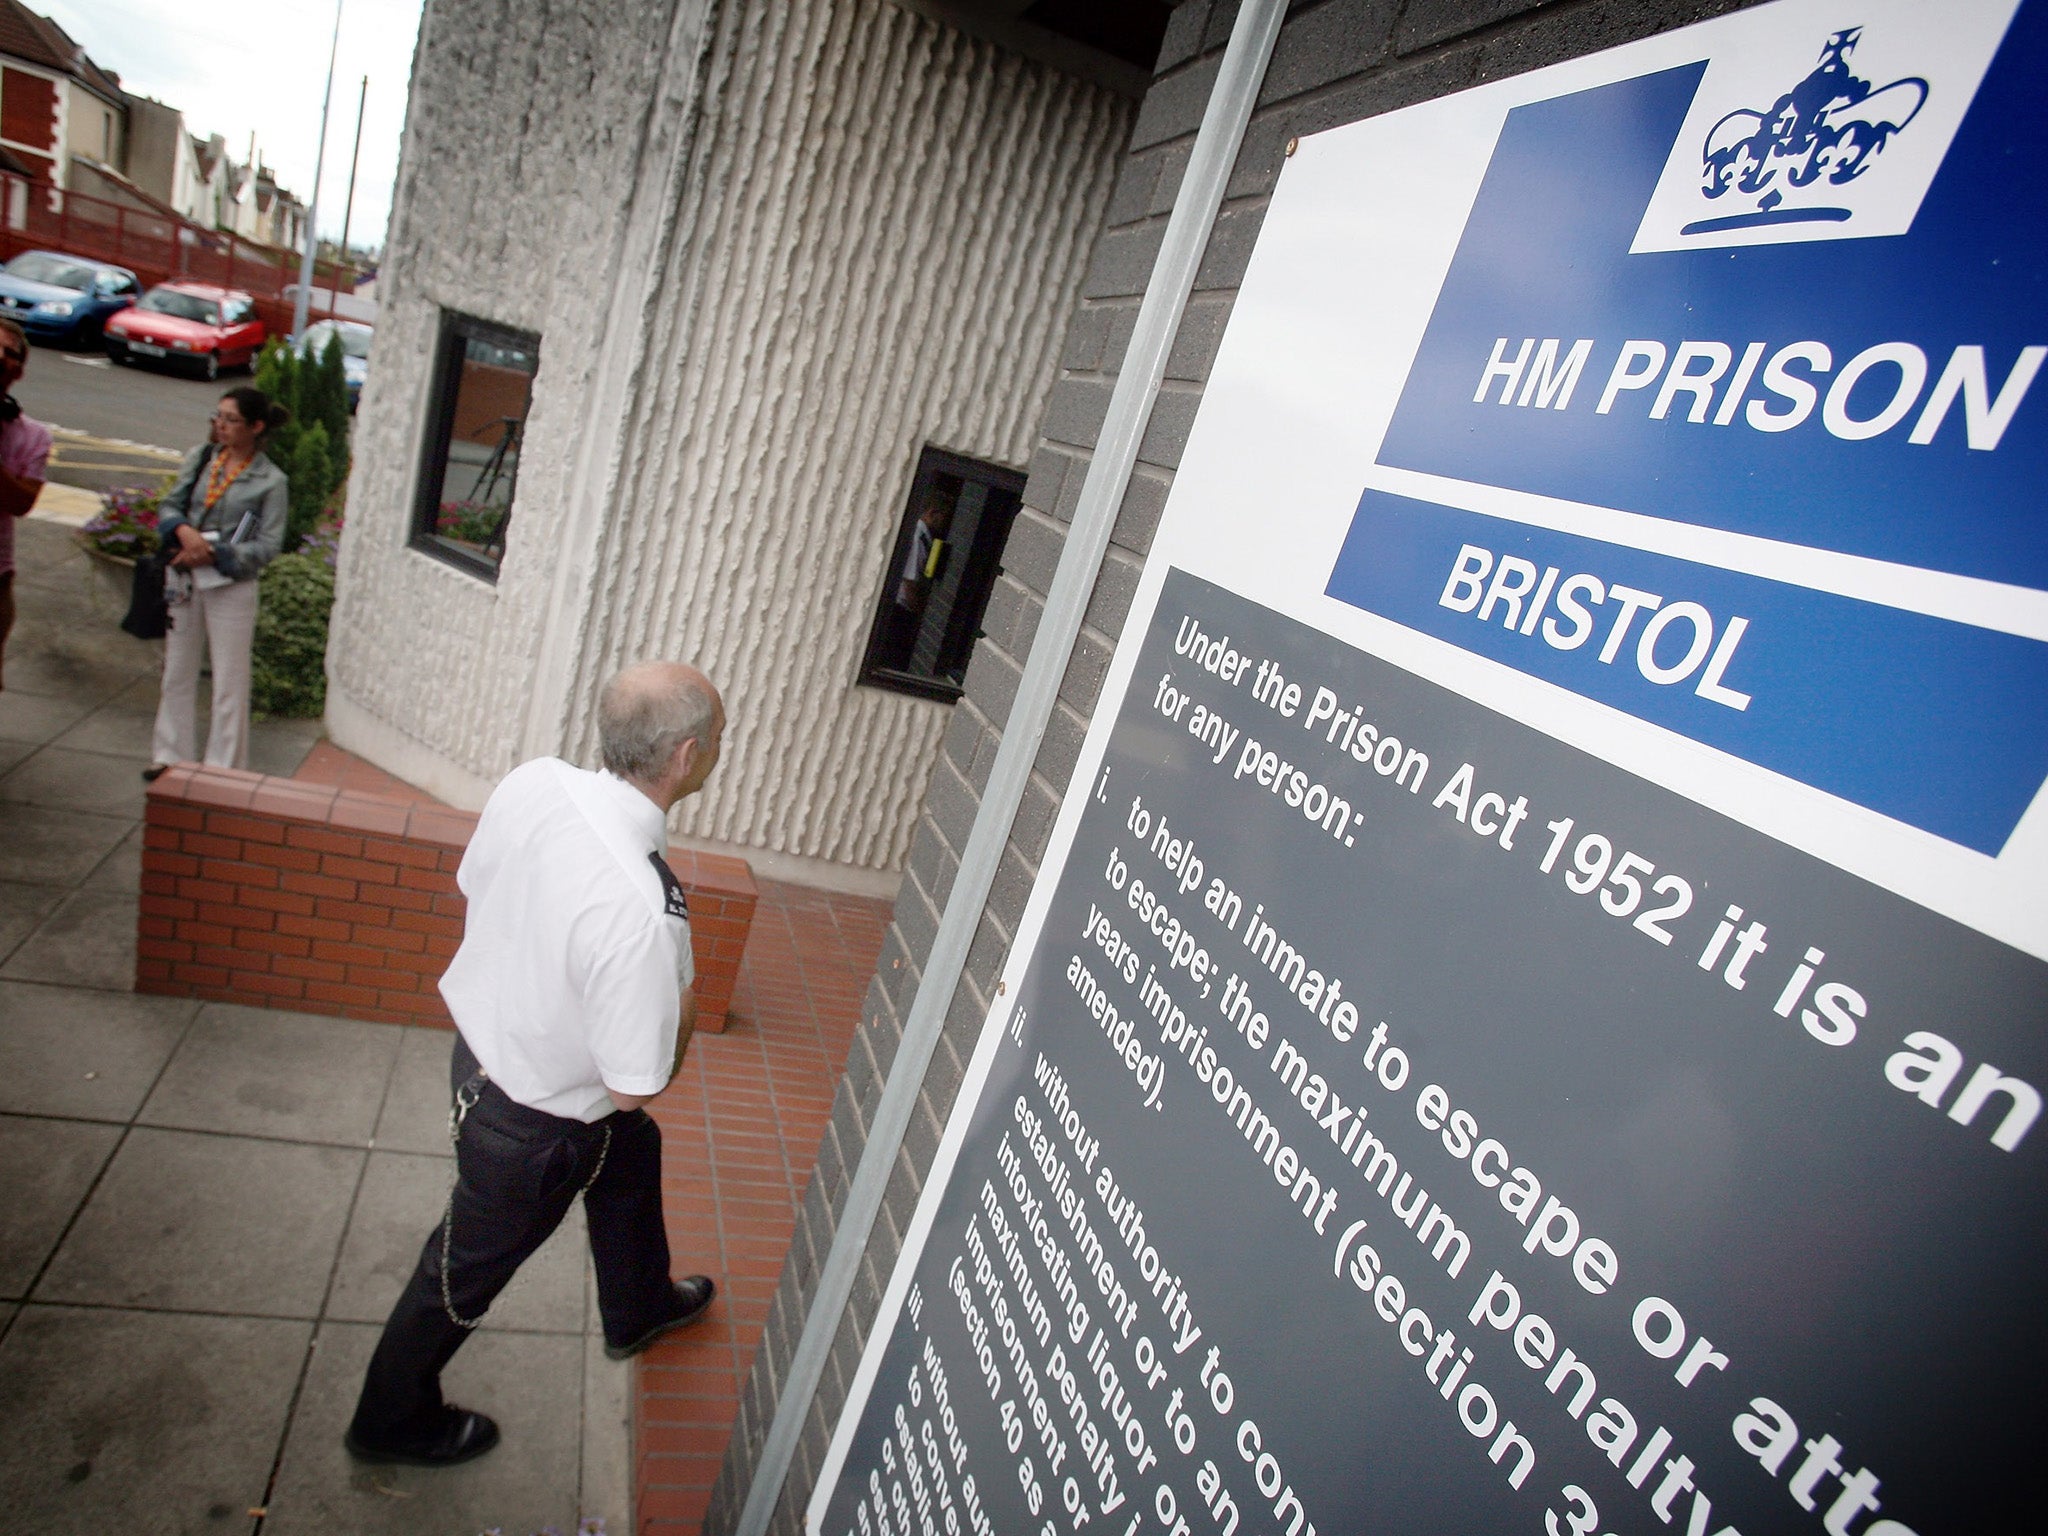 King was found dead at HMP Bristol prison in January (file photo)